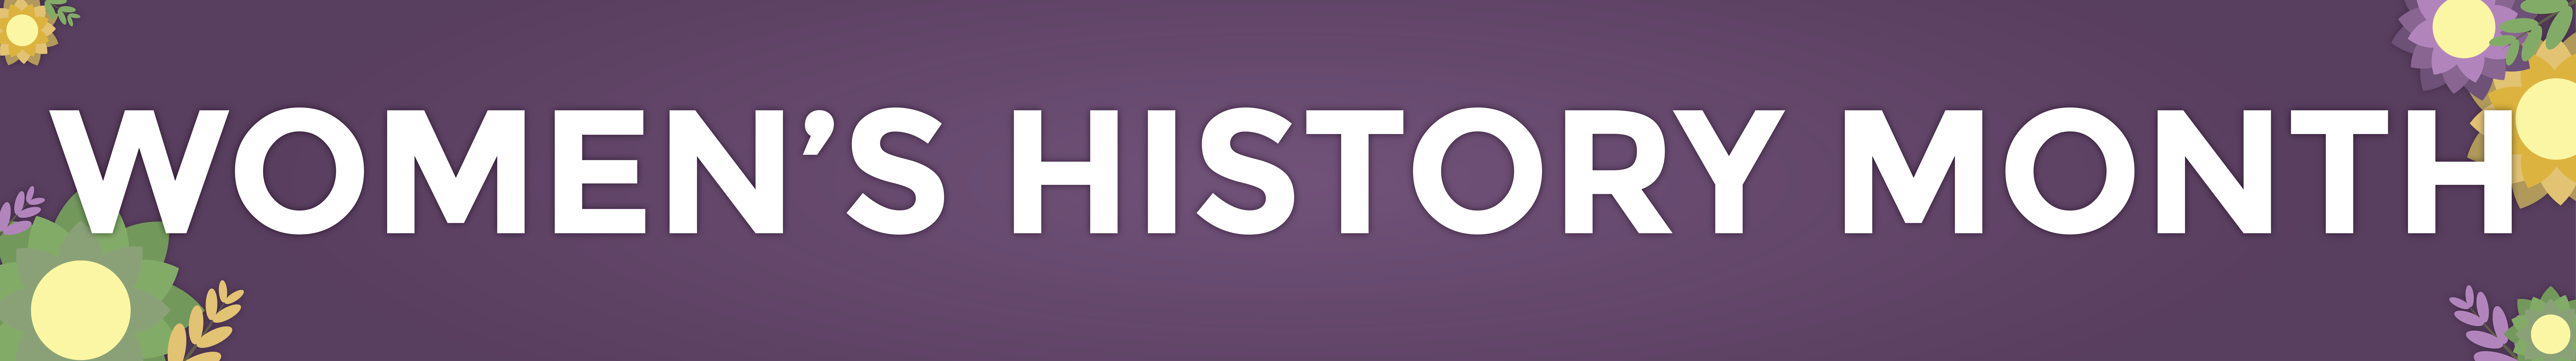 Graphic with a purple background and multi-colored flowers in the corner, with white text overlayed that reads "Women's History Month"